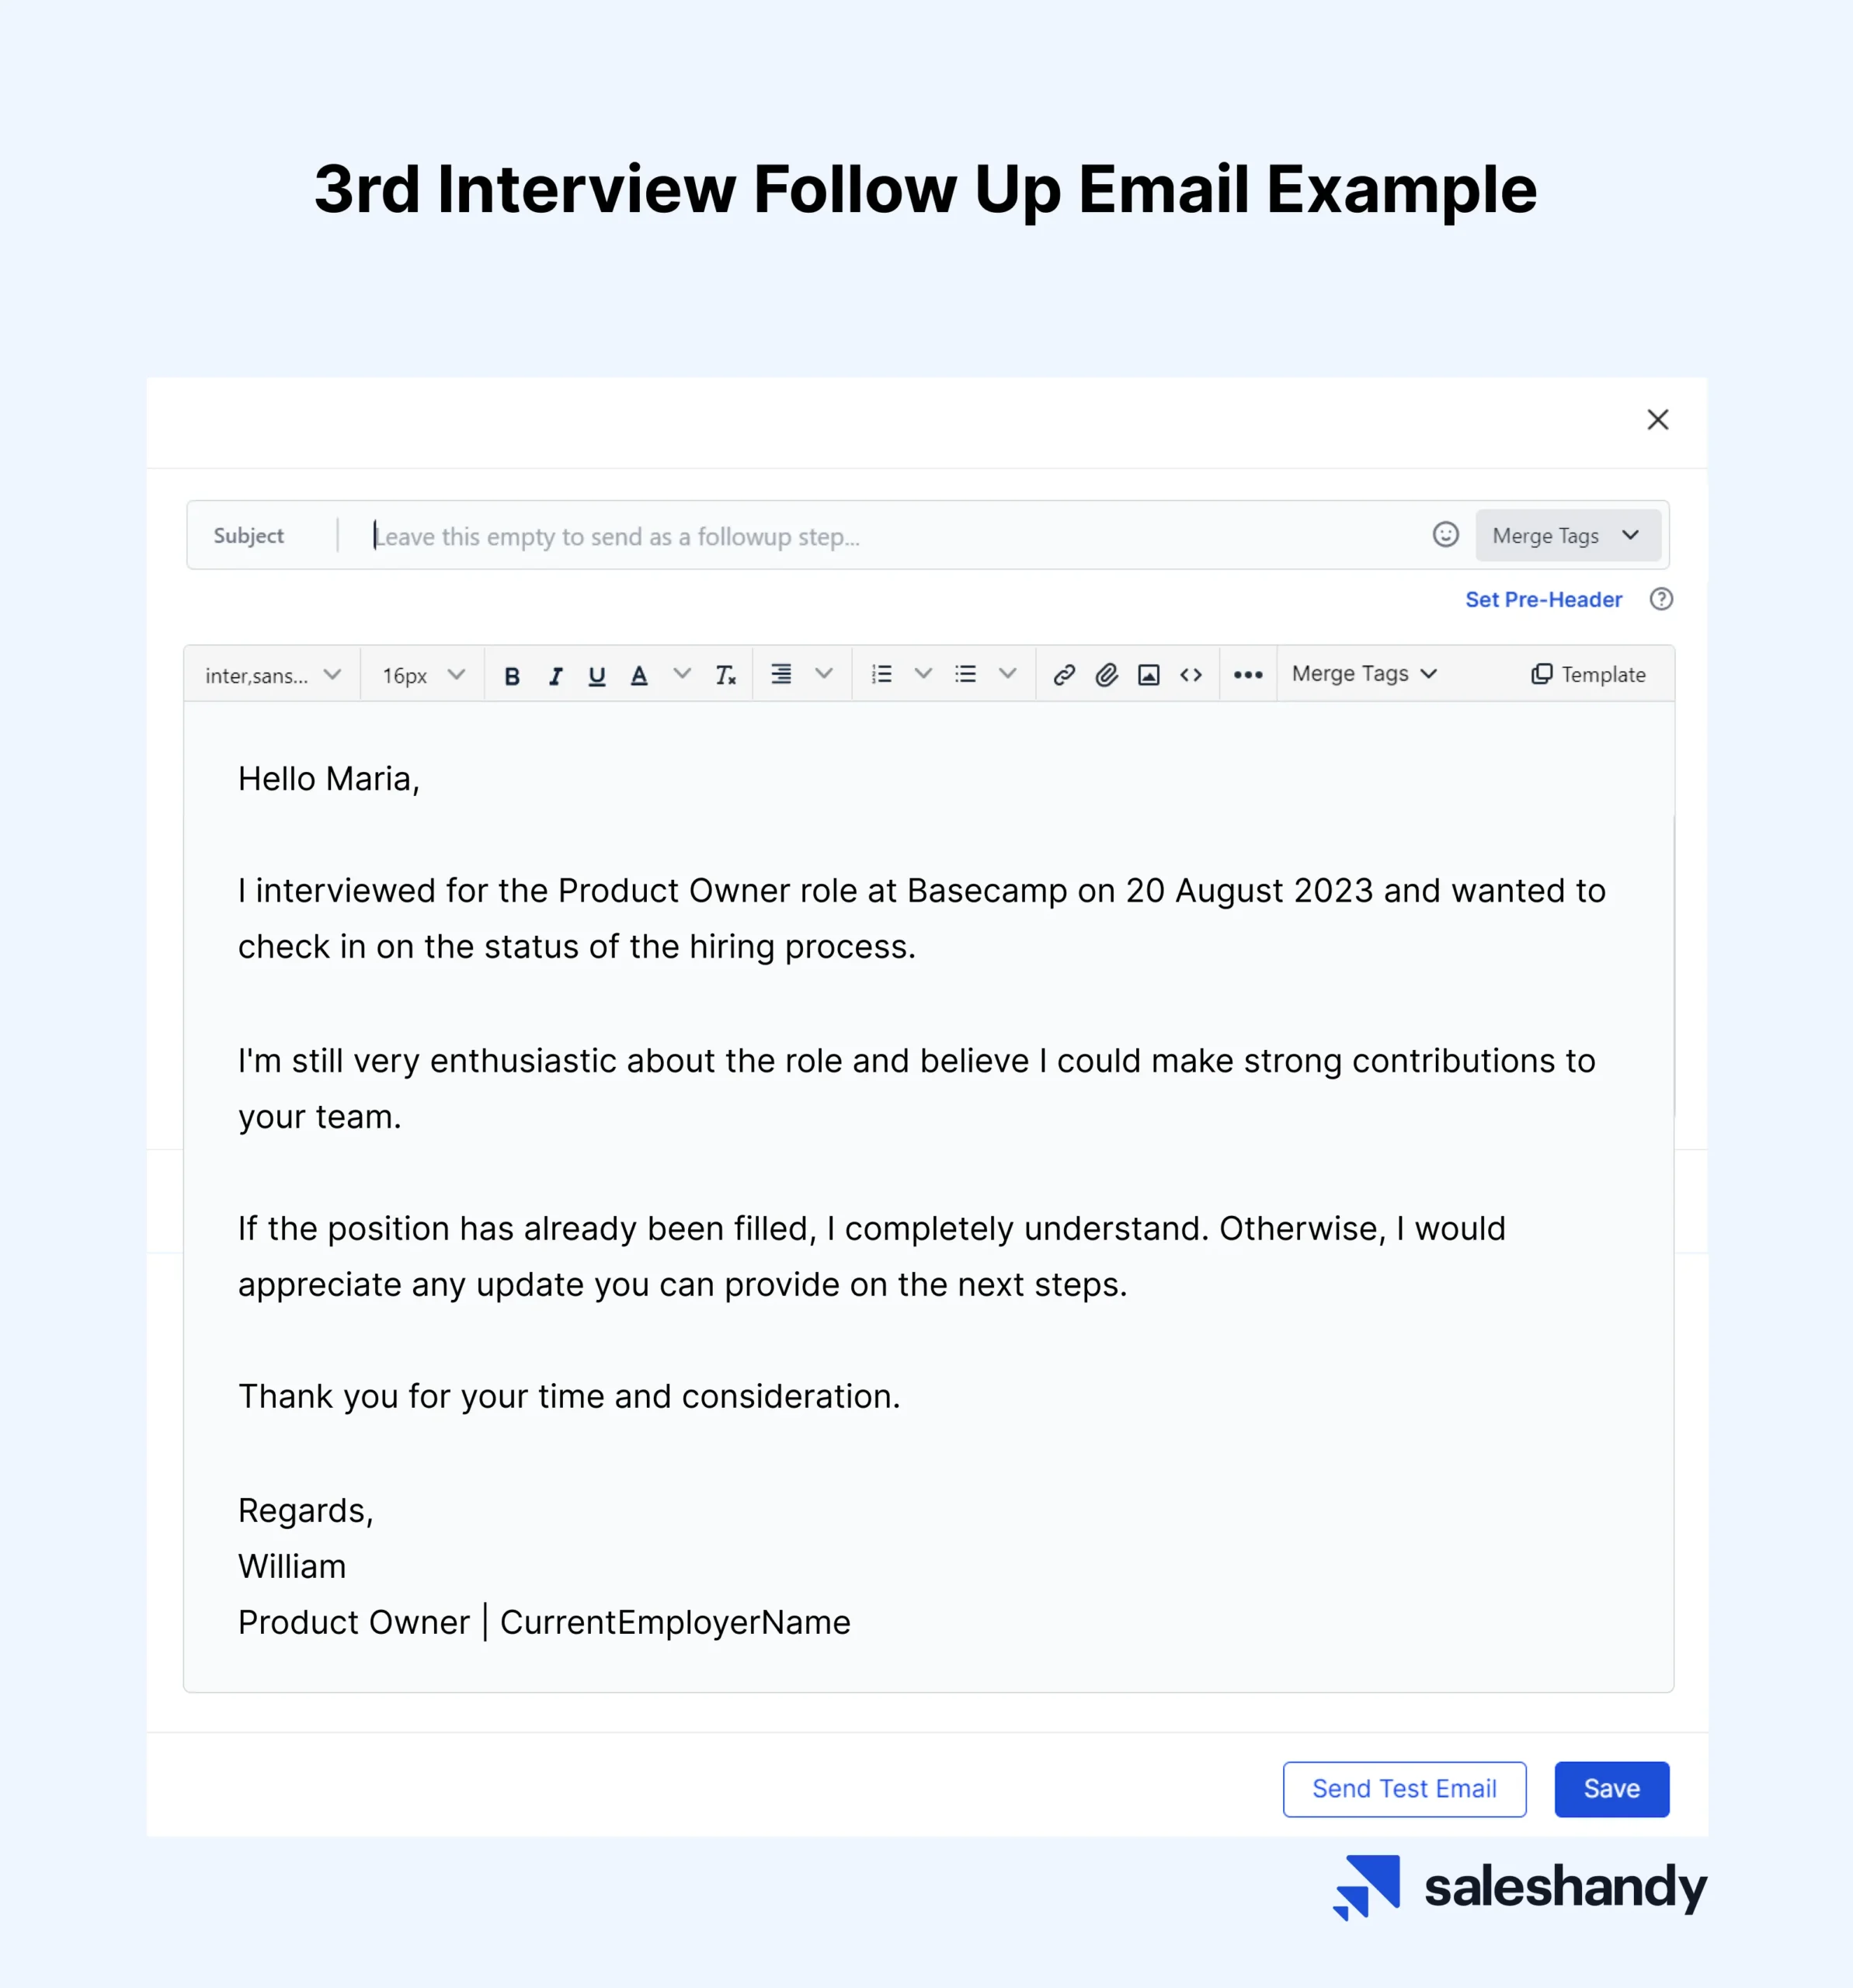 3rd interview followup email